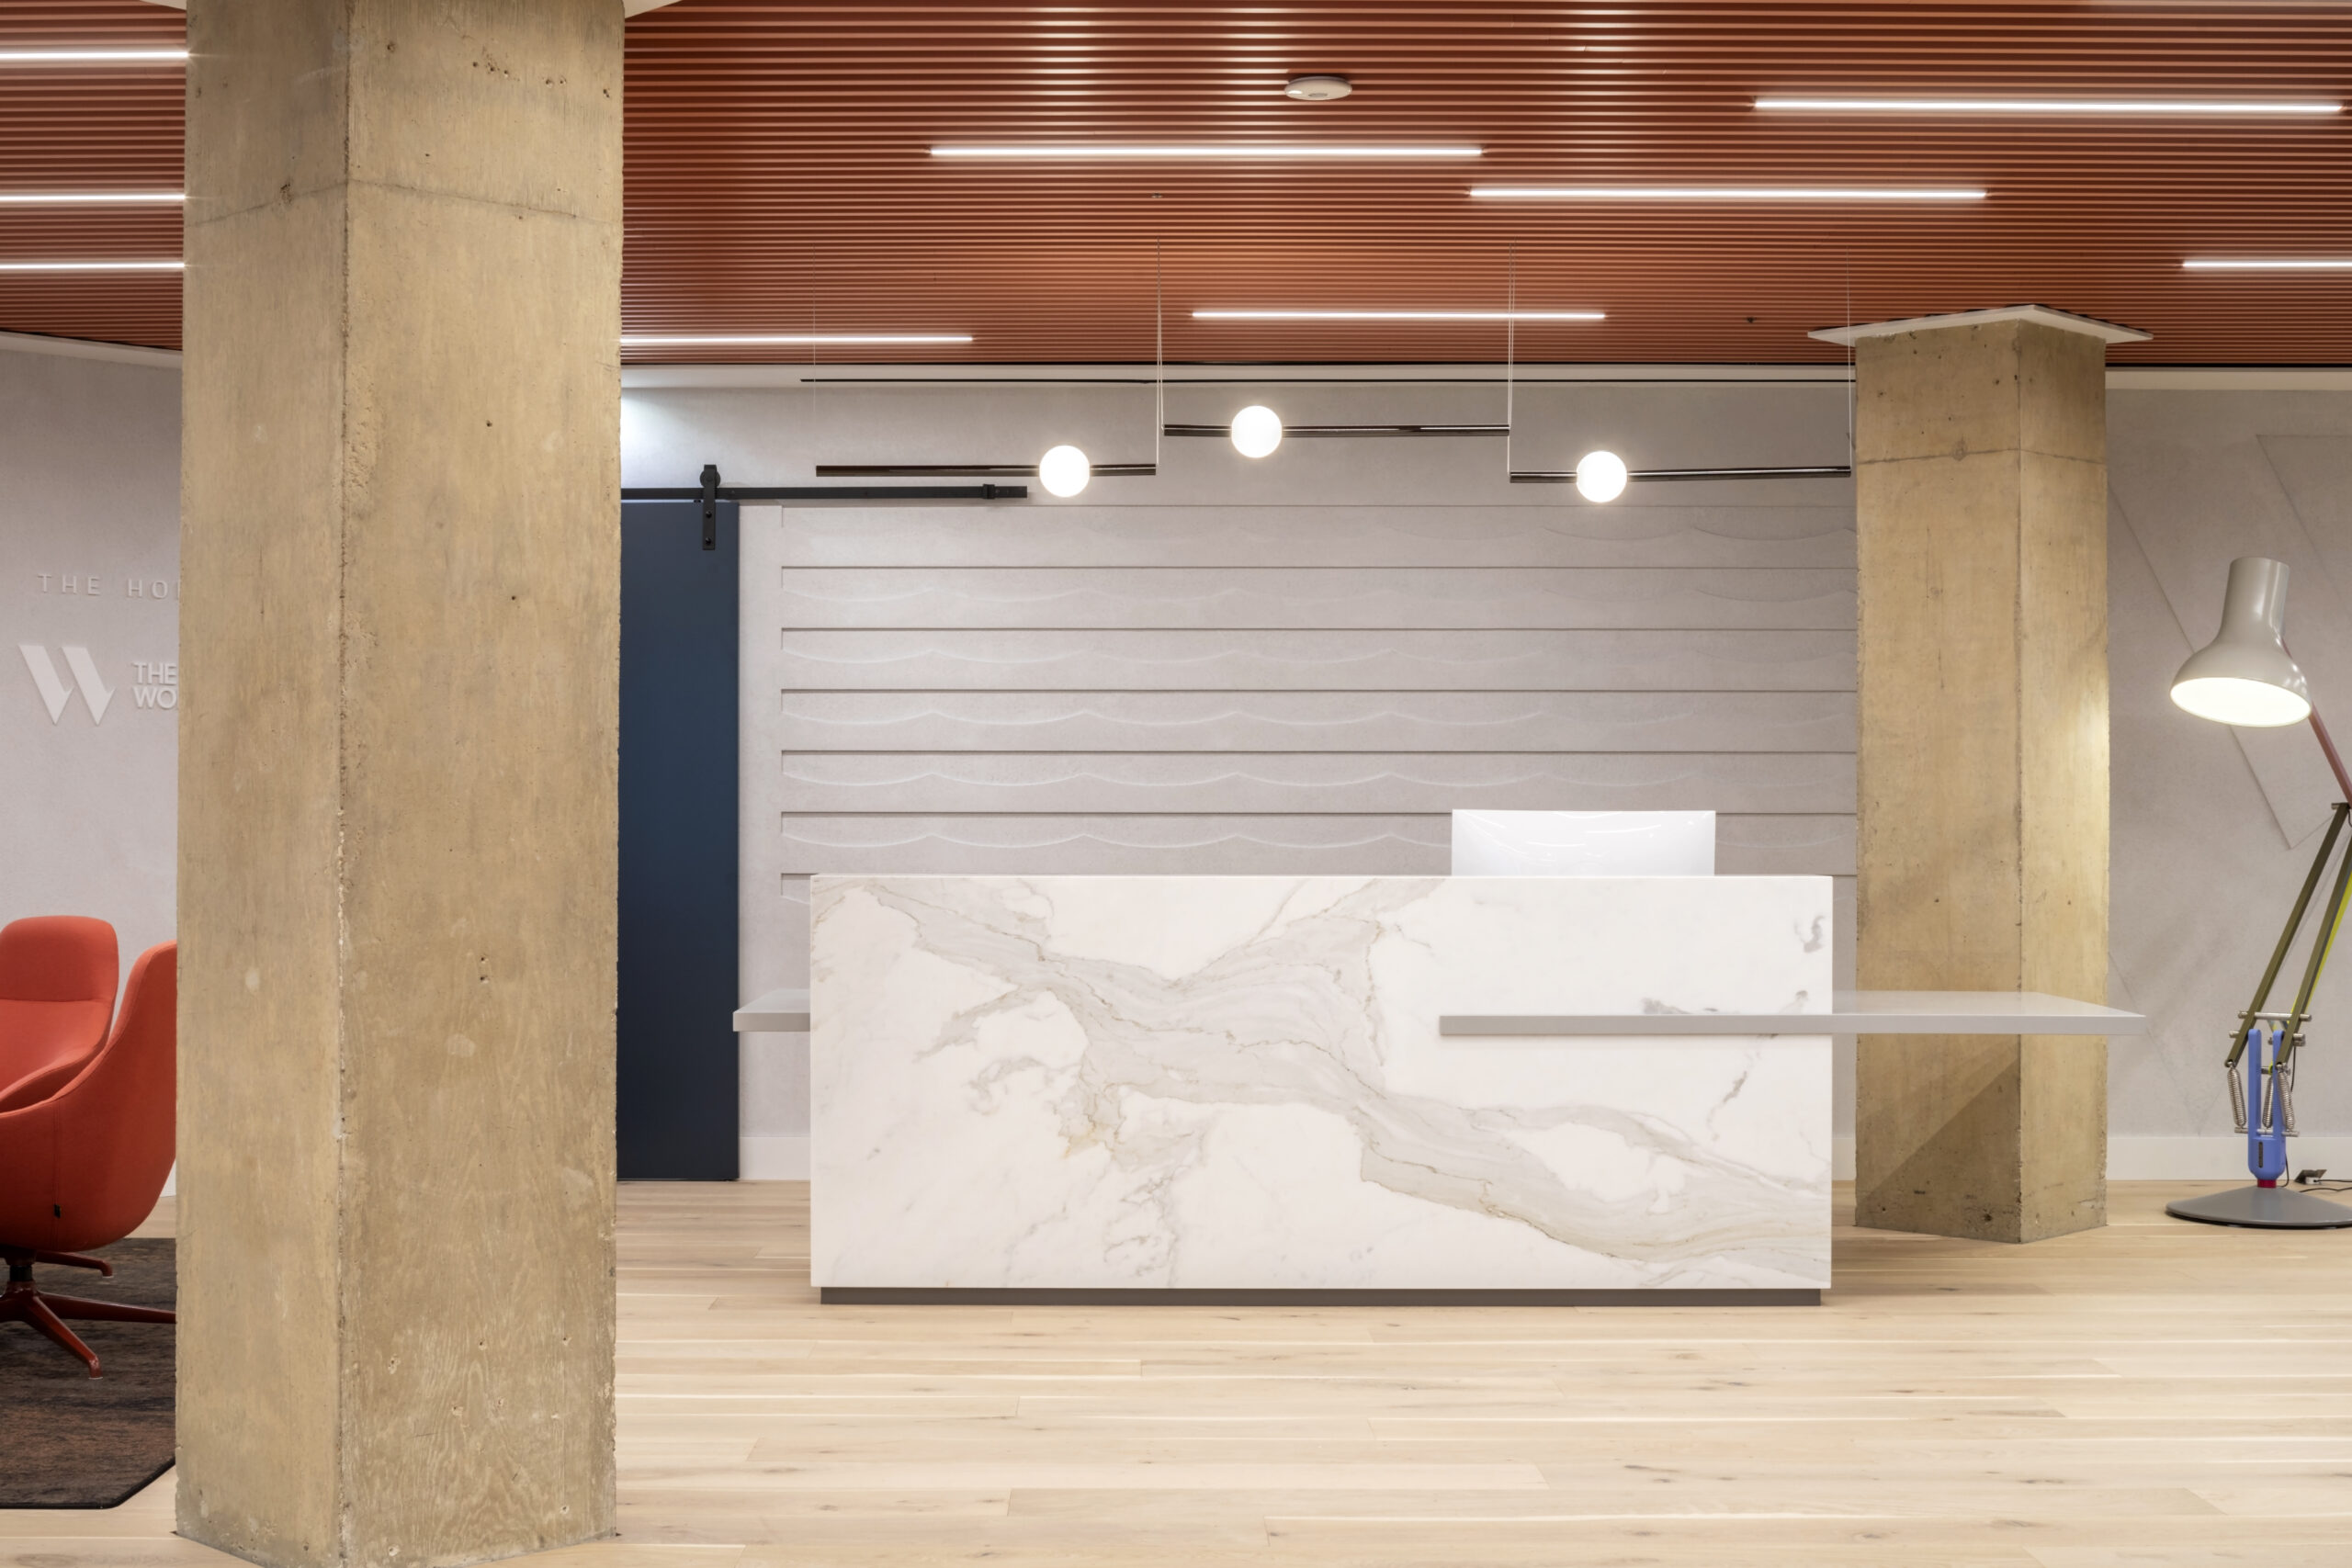 Armourcoat Sculptural Plaster Wall with Koncrete Textured Polished Plaster Finish used in commercial building, The Workshop